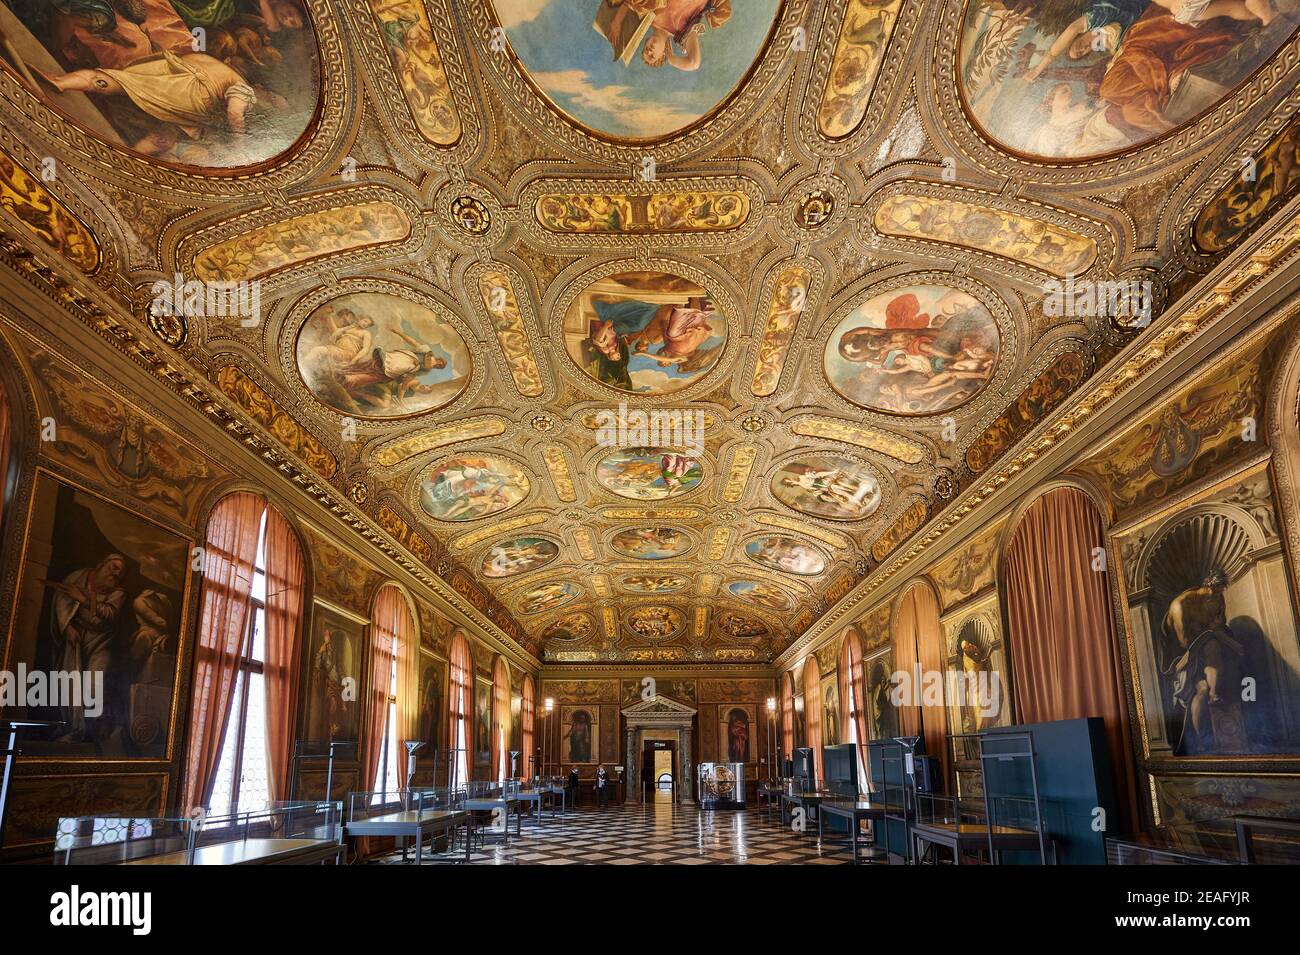 ceiling painting in Sala di lettura or Reading room in the Biblioteca Nazionale Marciana with the Mannifesto of Mannerism, Venice, Veneto, Italy Stock Photo